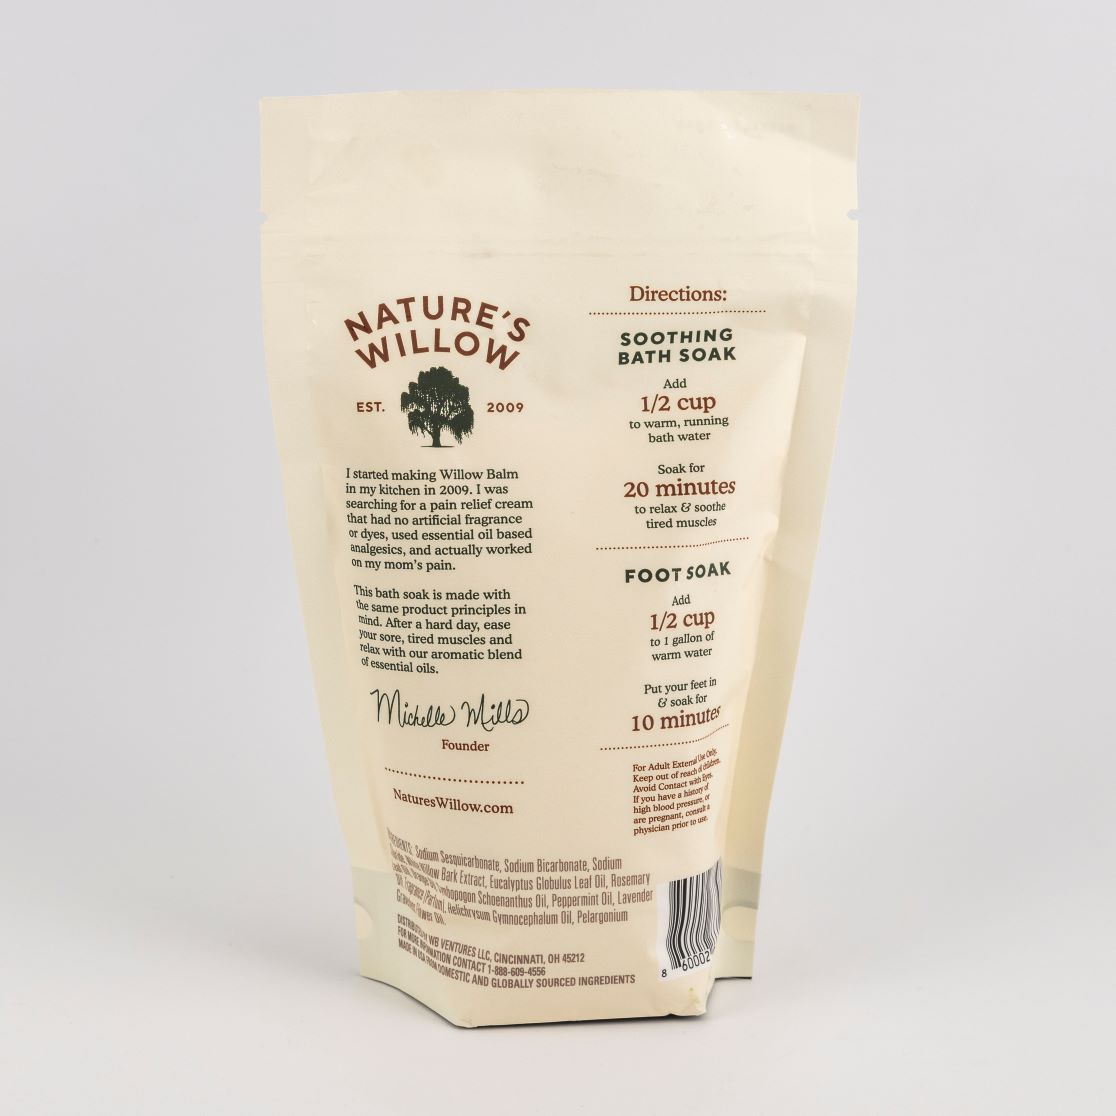 Nature's Willow Holiday Bundle